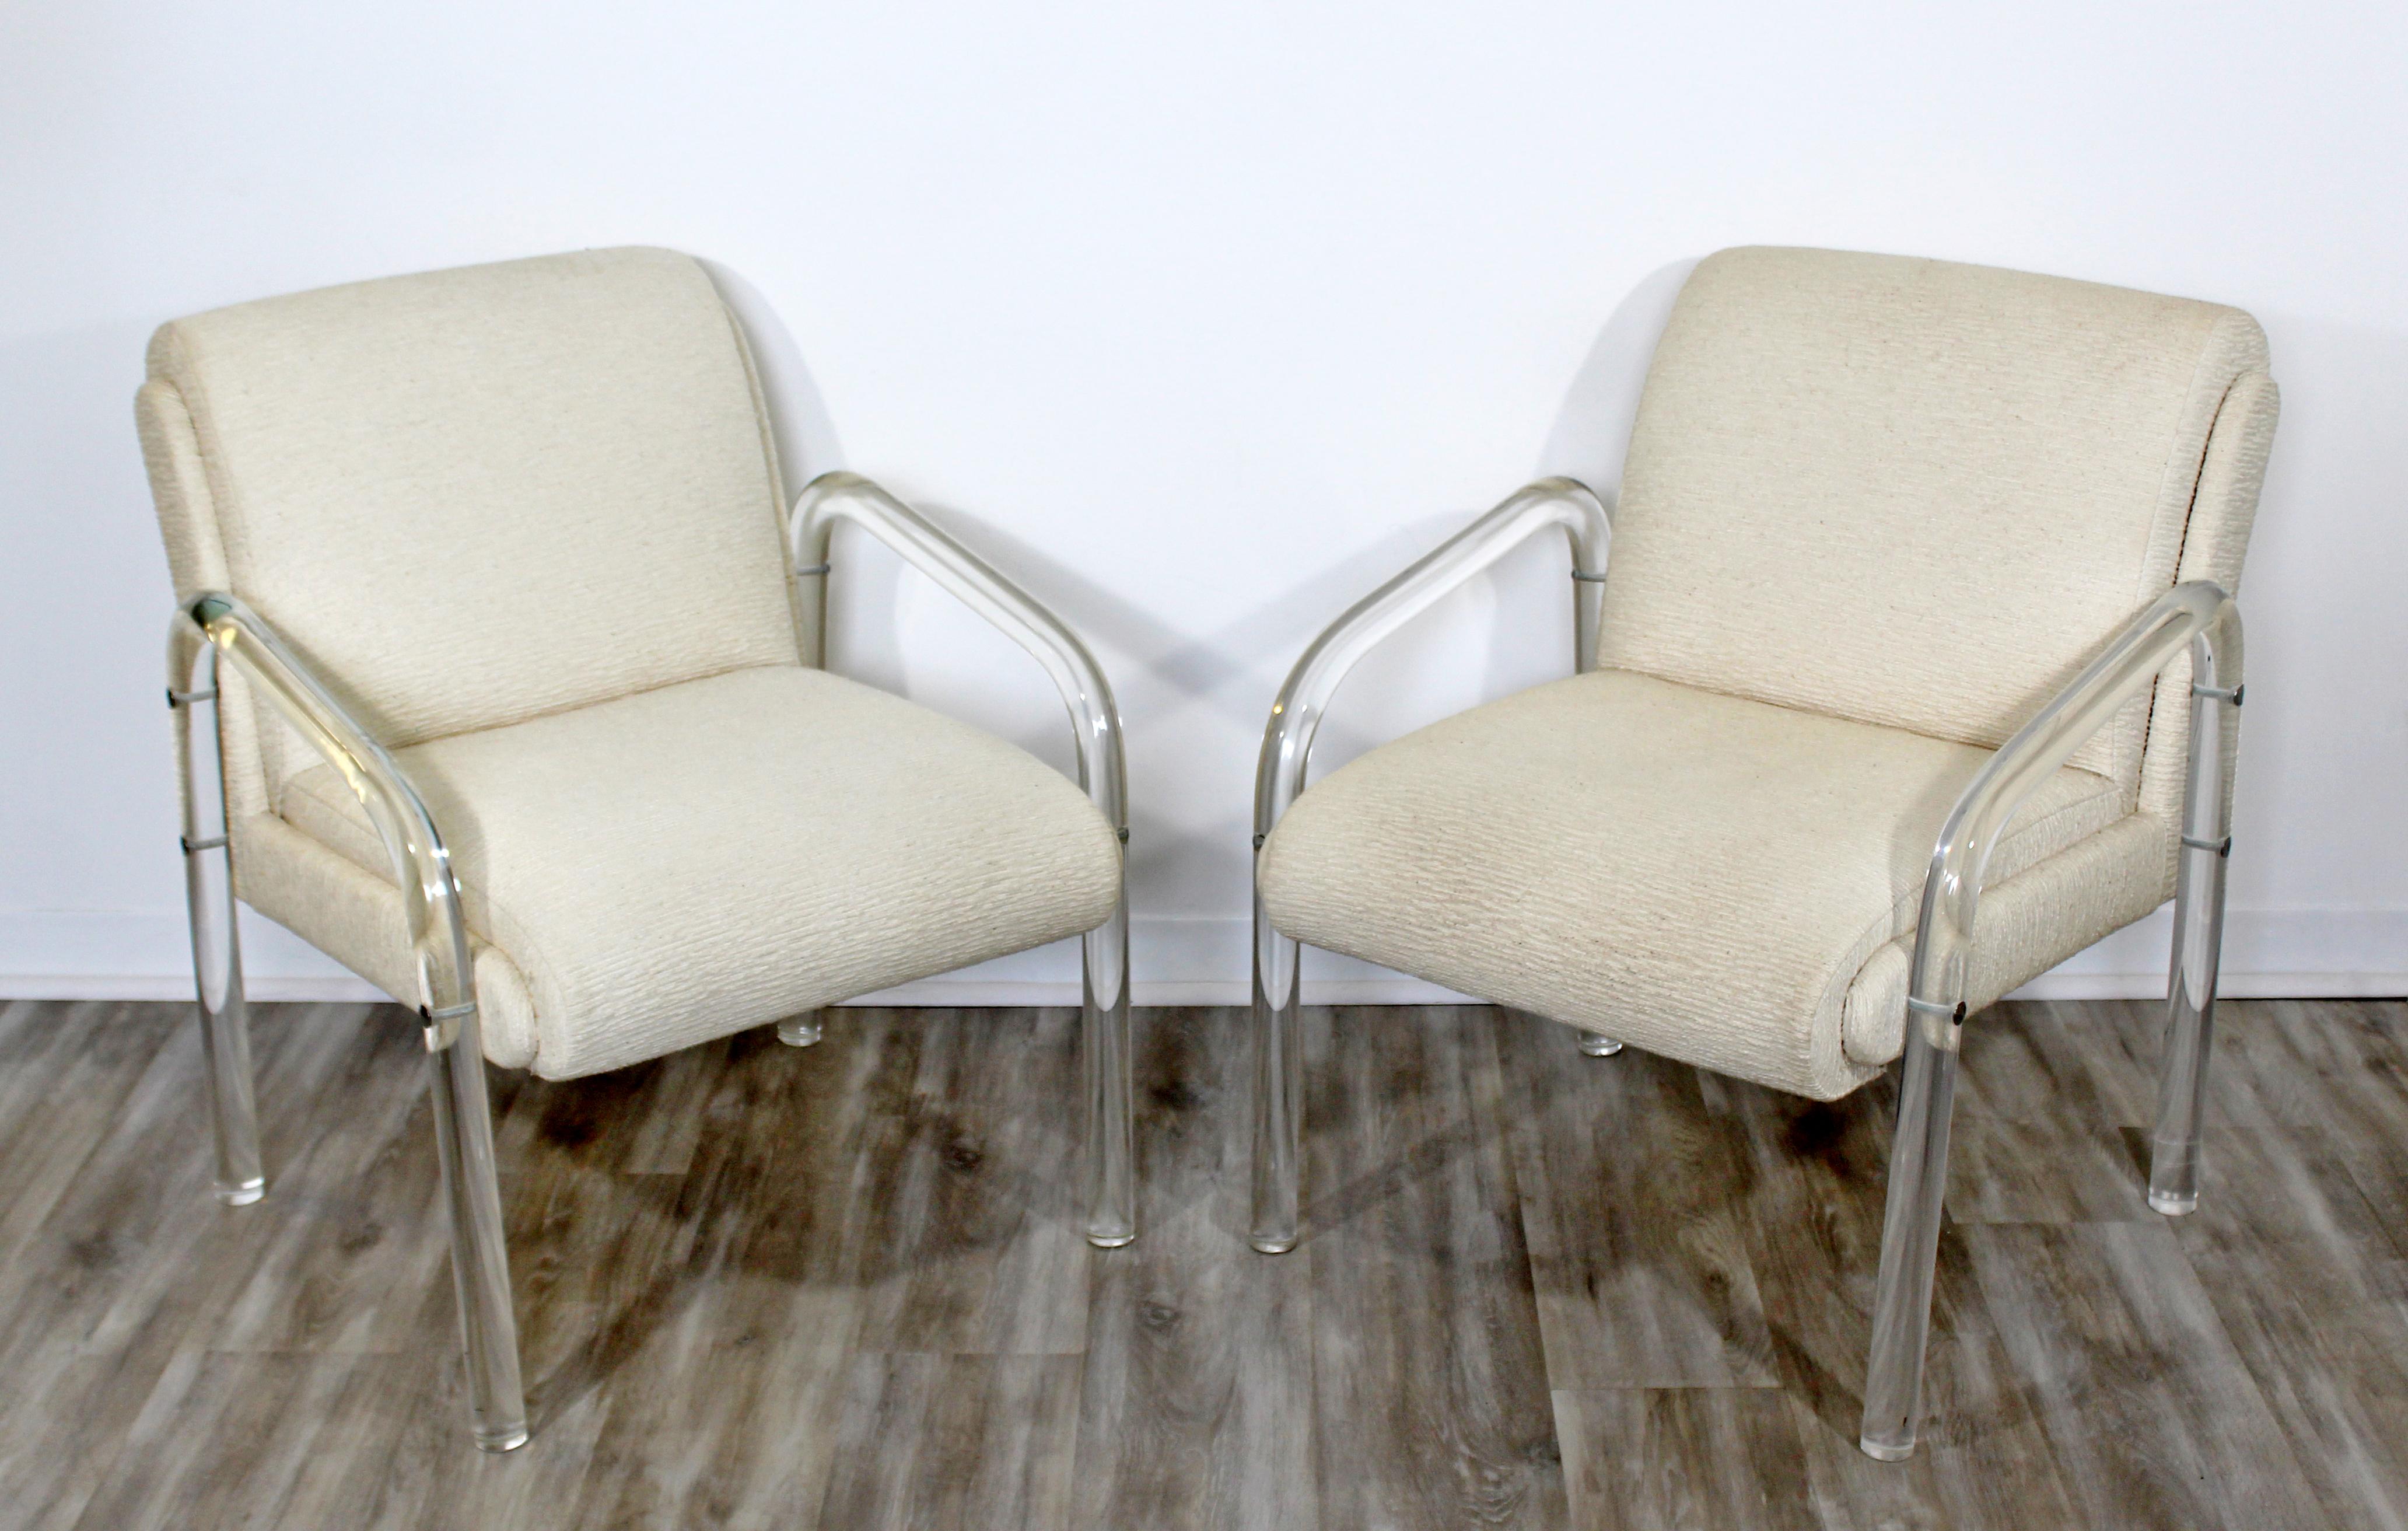 For your consideration is a lovely pair of Lucite armchairs, by Charles Hollis Jones for Hill Mfg, circa the 1970s. In excellent condition. The dimensions are 26